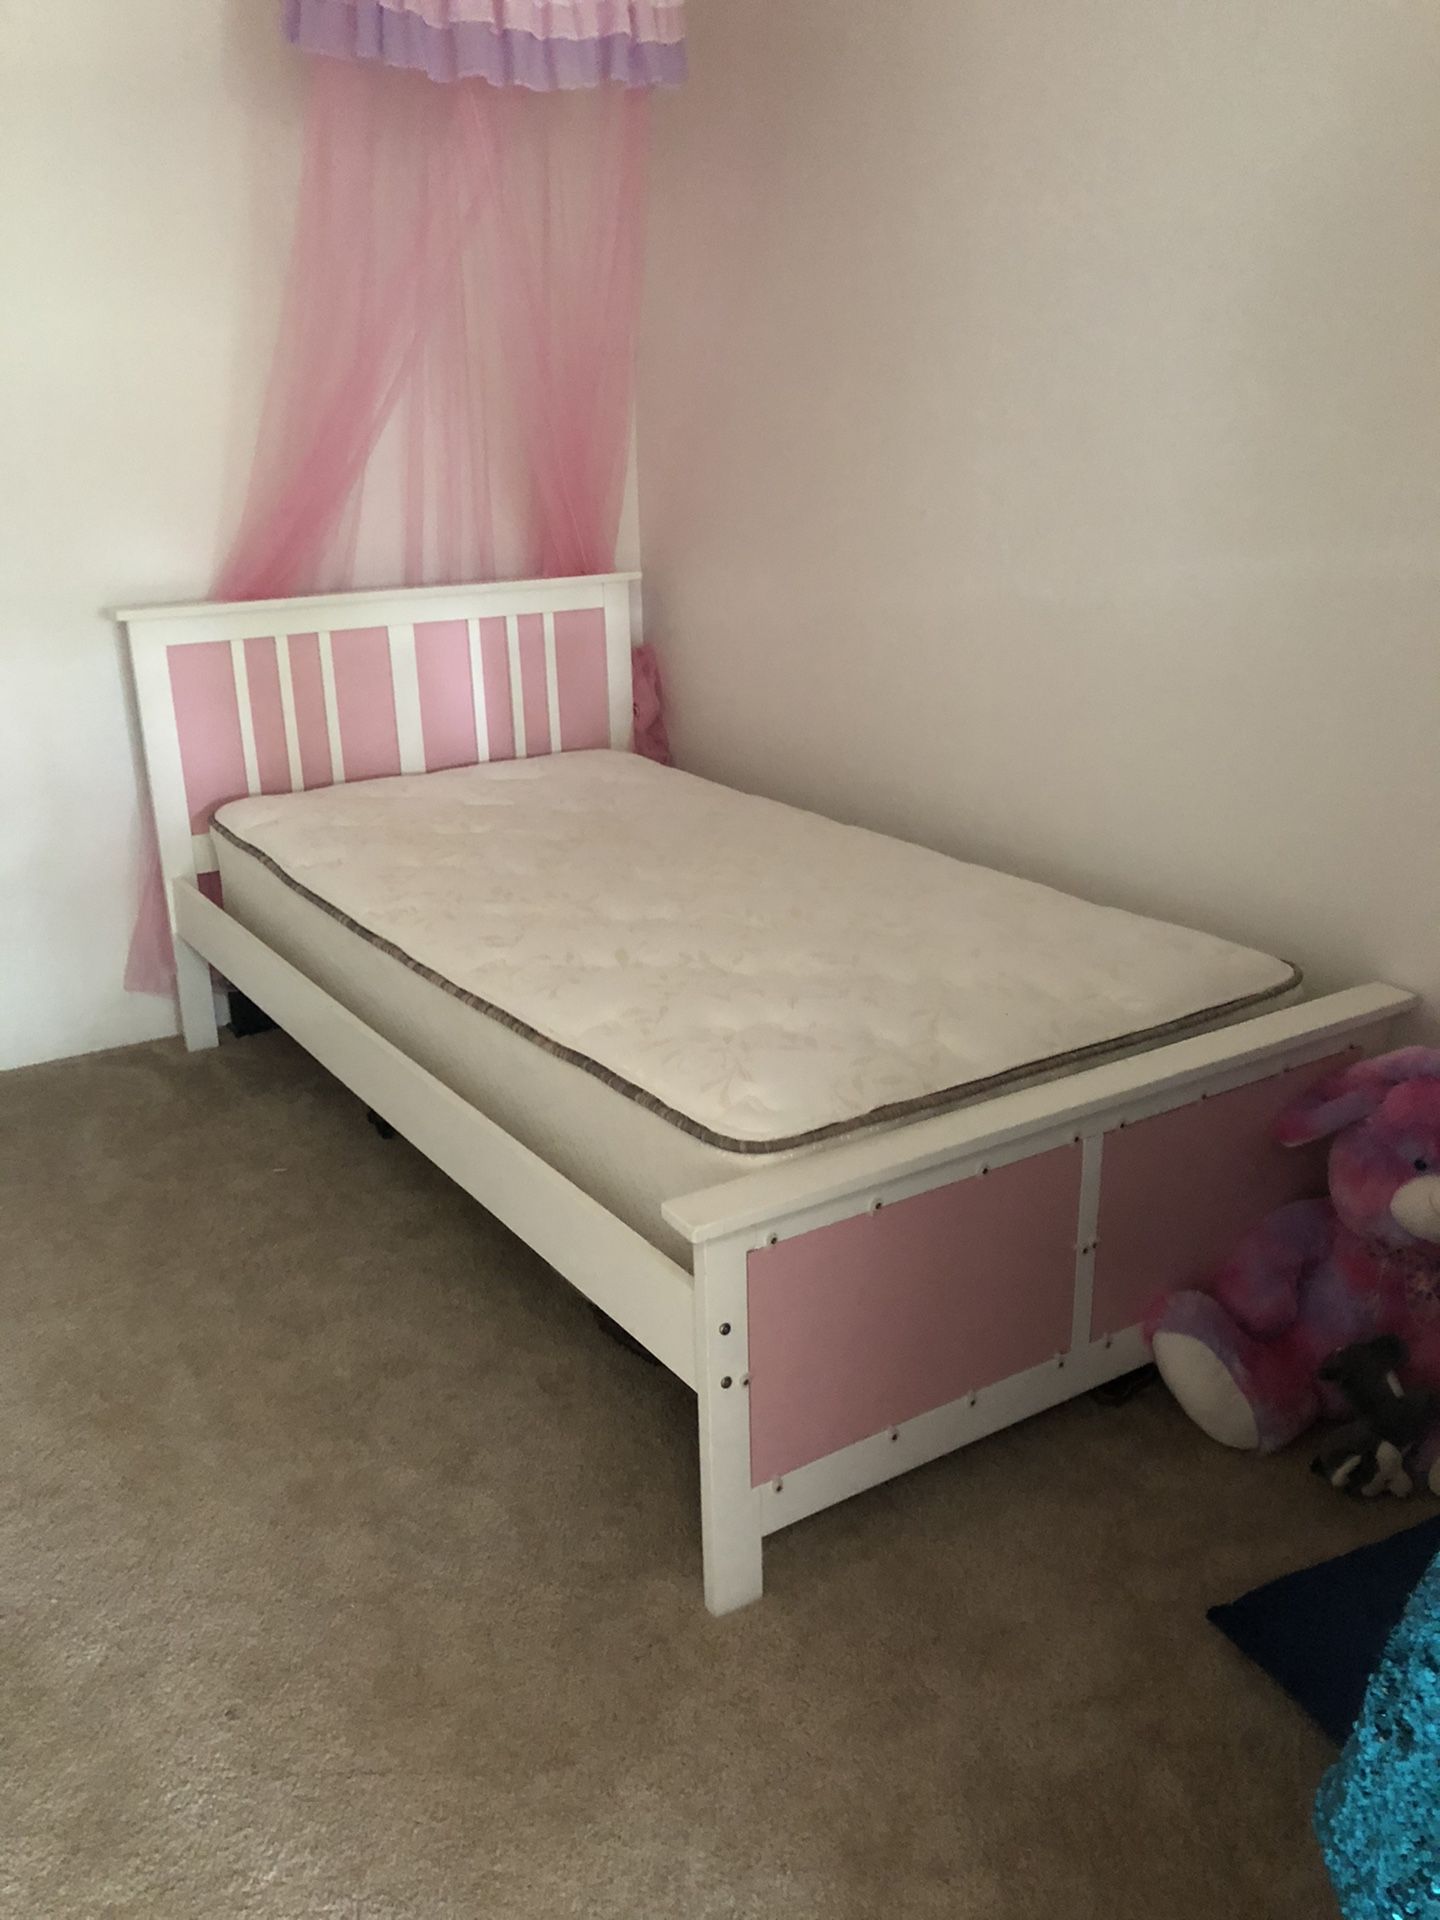 Newer Girls Twin bed with mattress